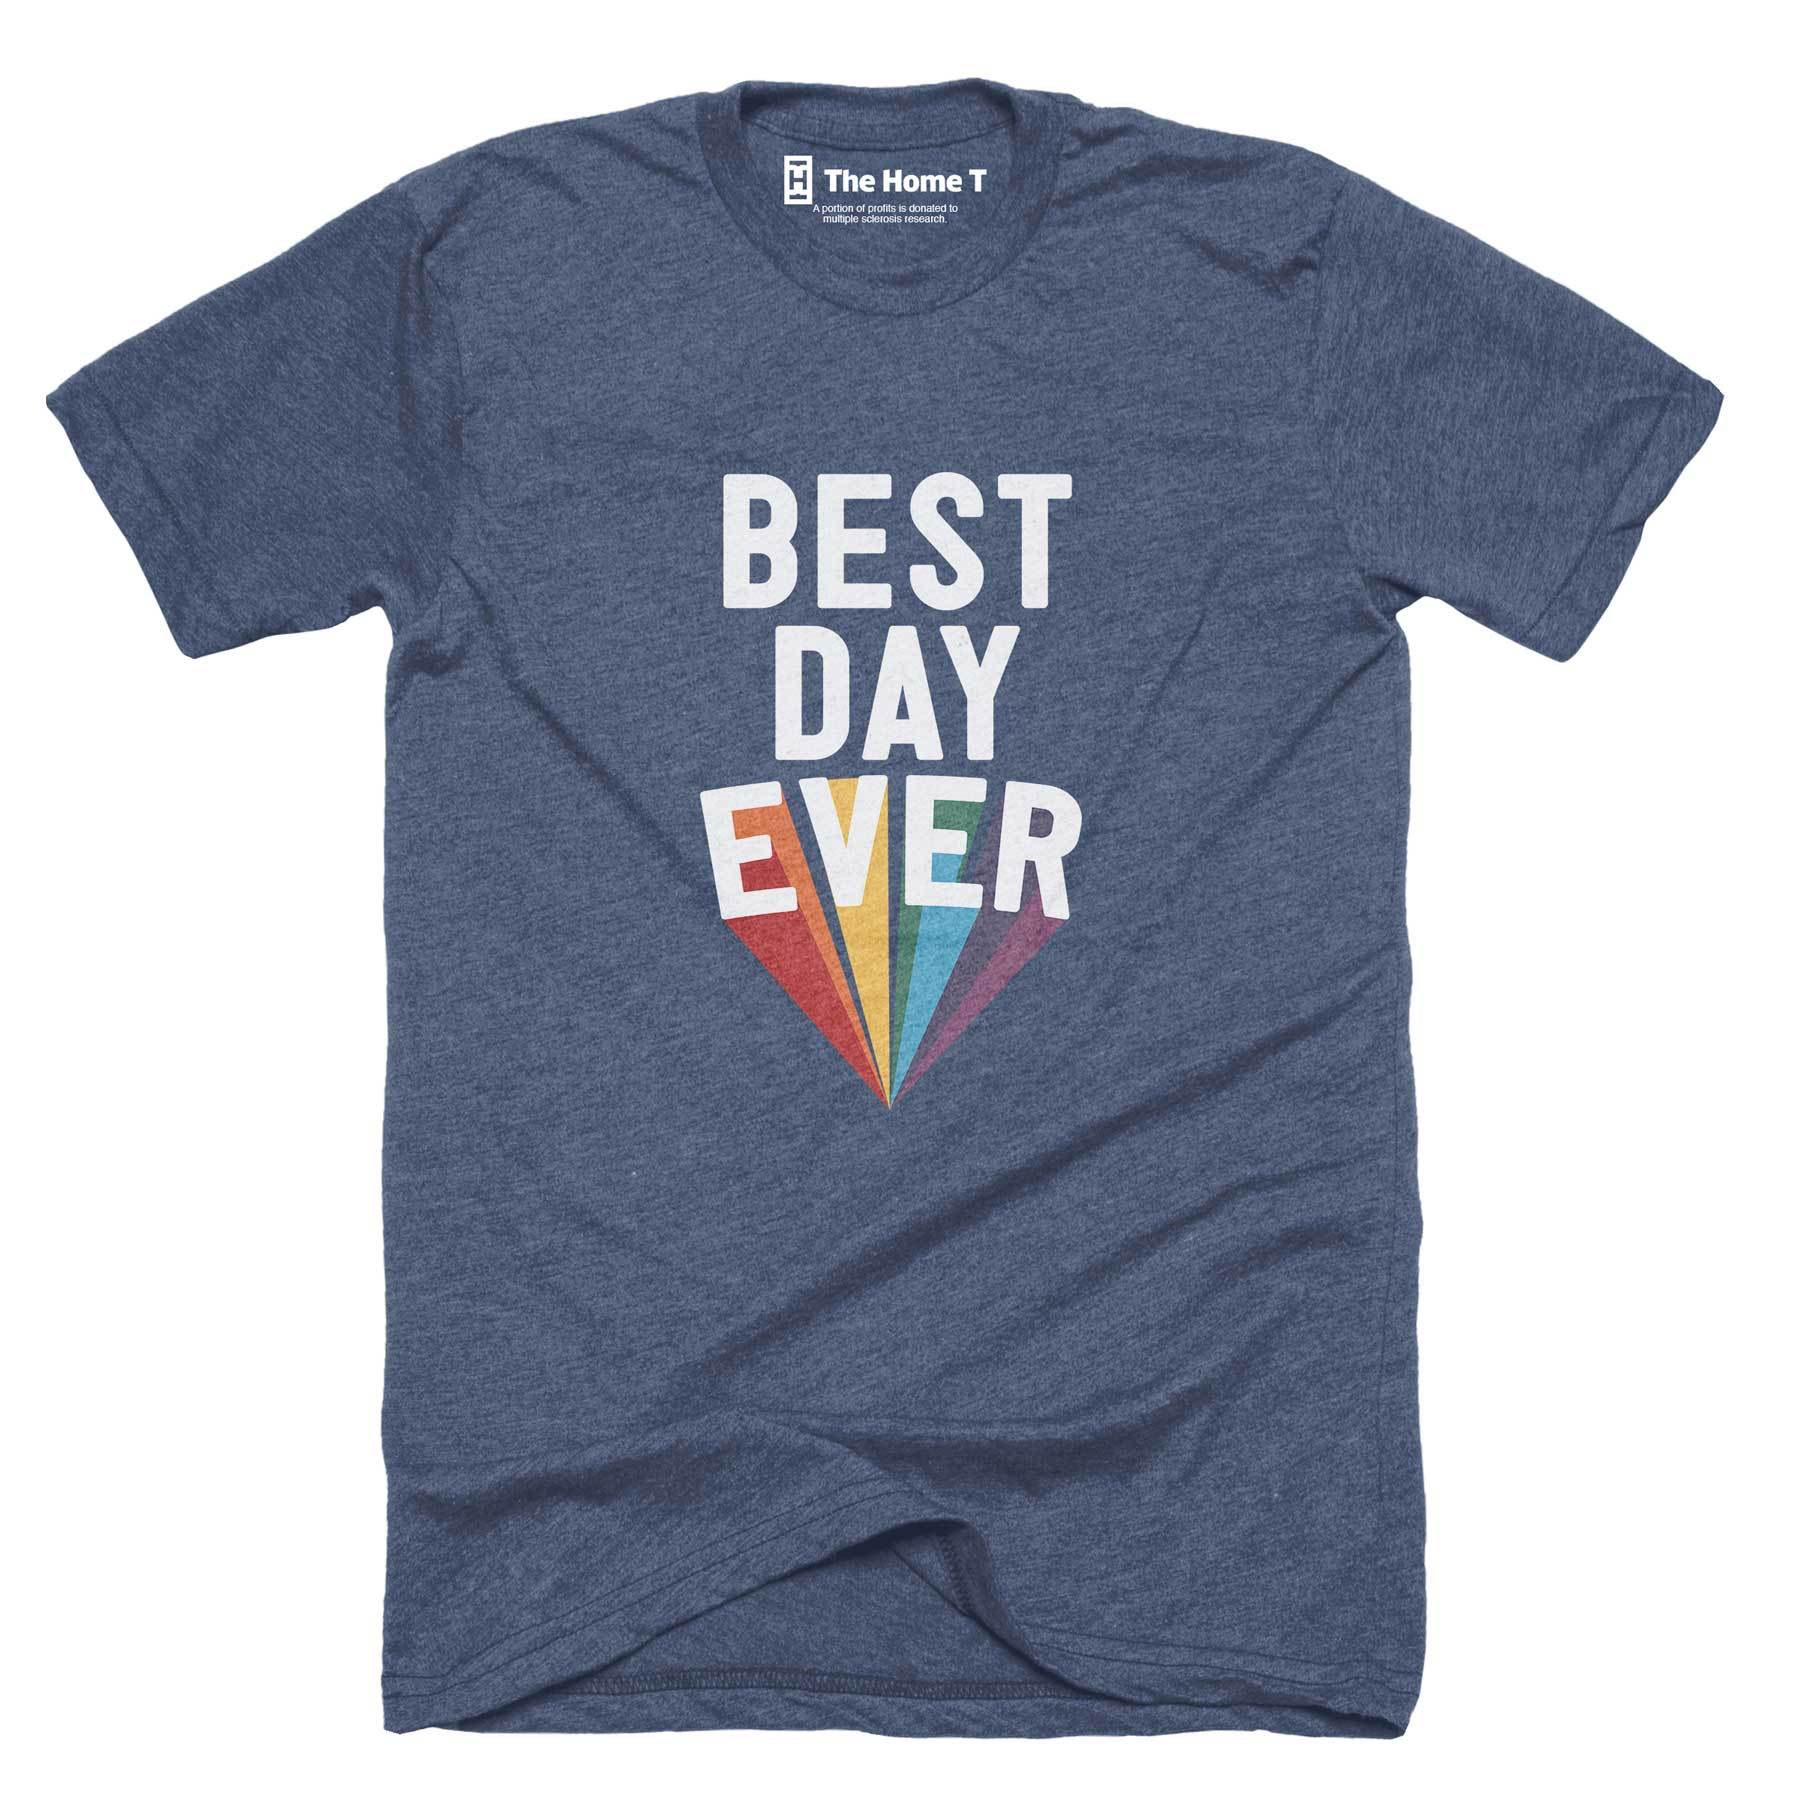 Best Day Ever Crew neck The Home T S Navy